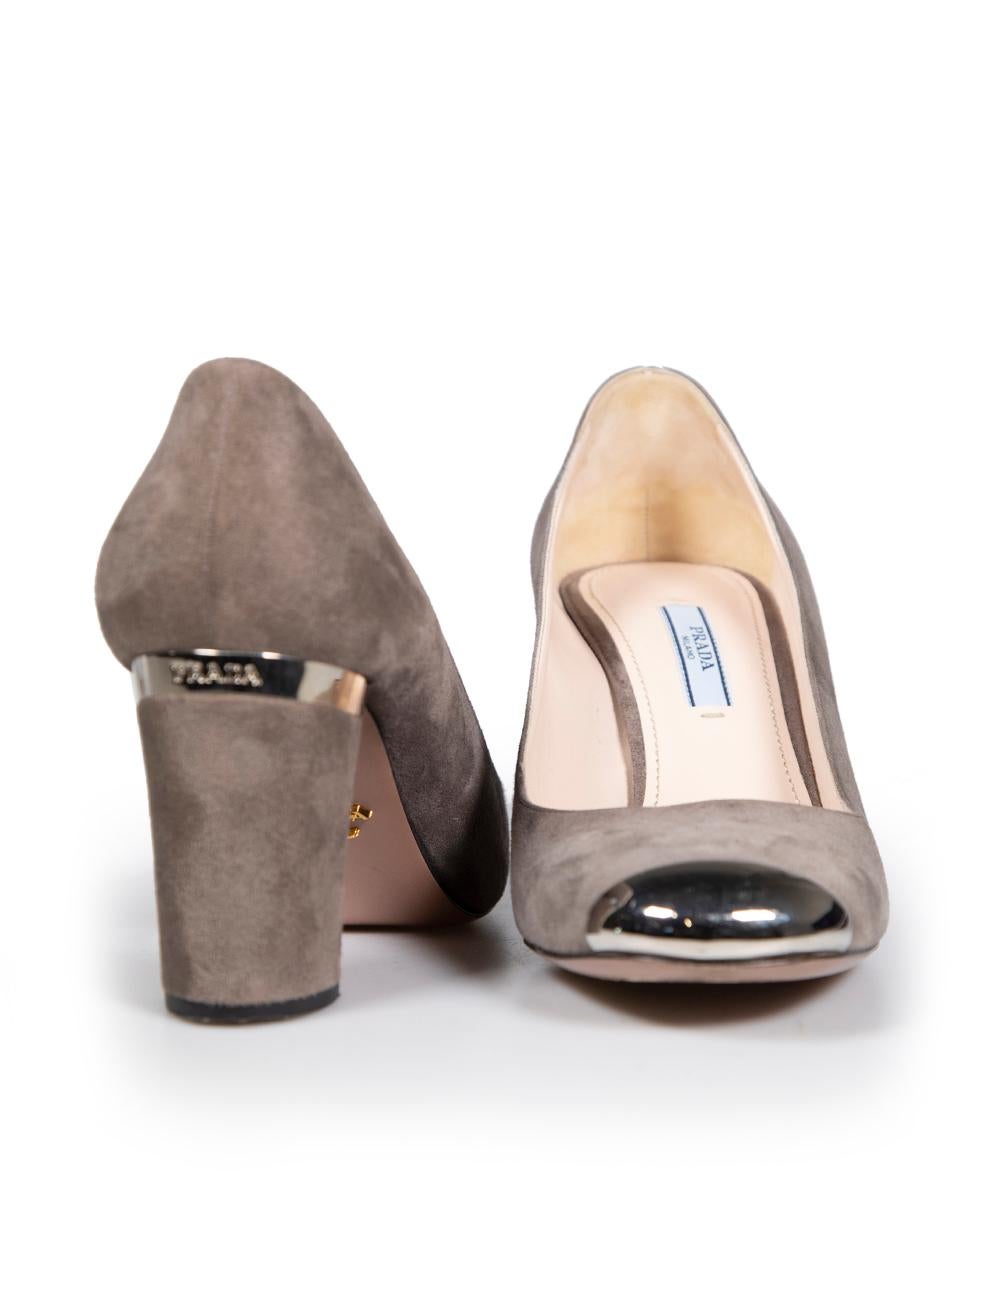 Prada Grey Suede Metal Cap-Toe Pumps Size IT 38.5 In Good Condition For Sale In London, GB